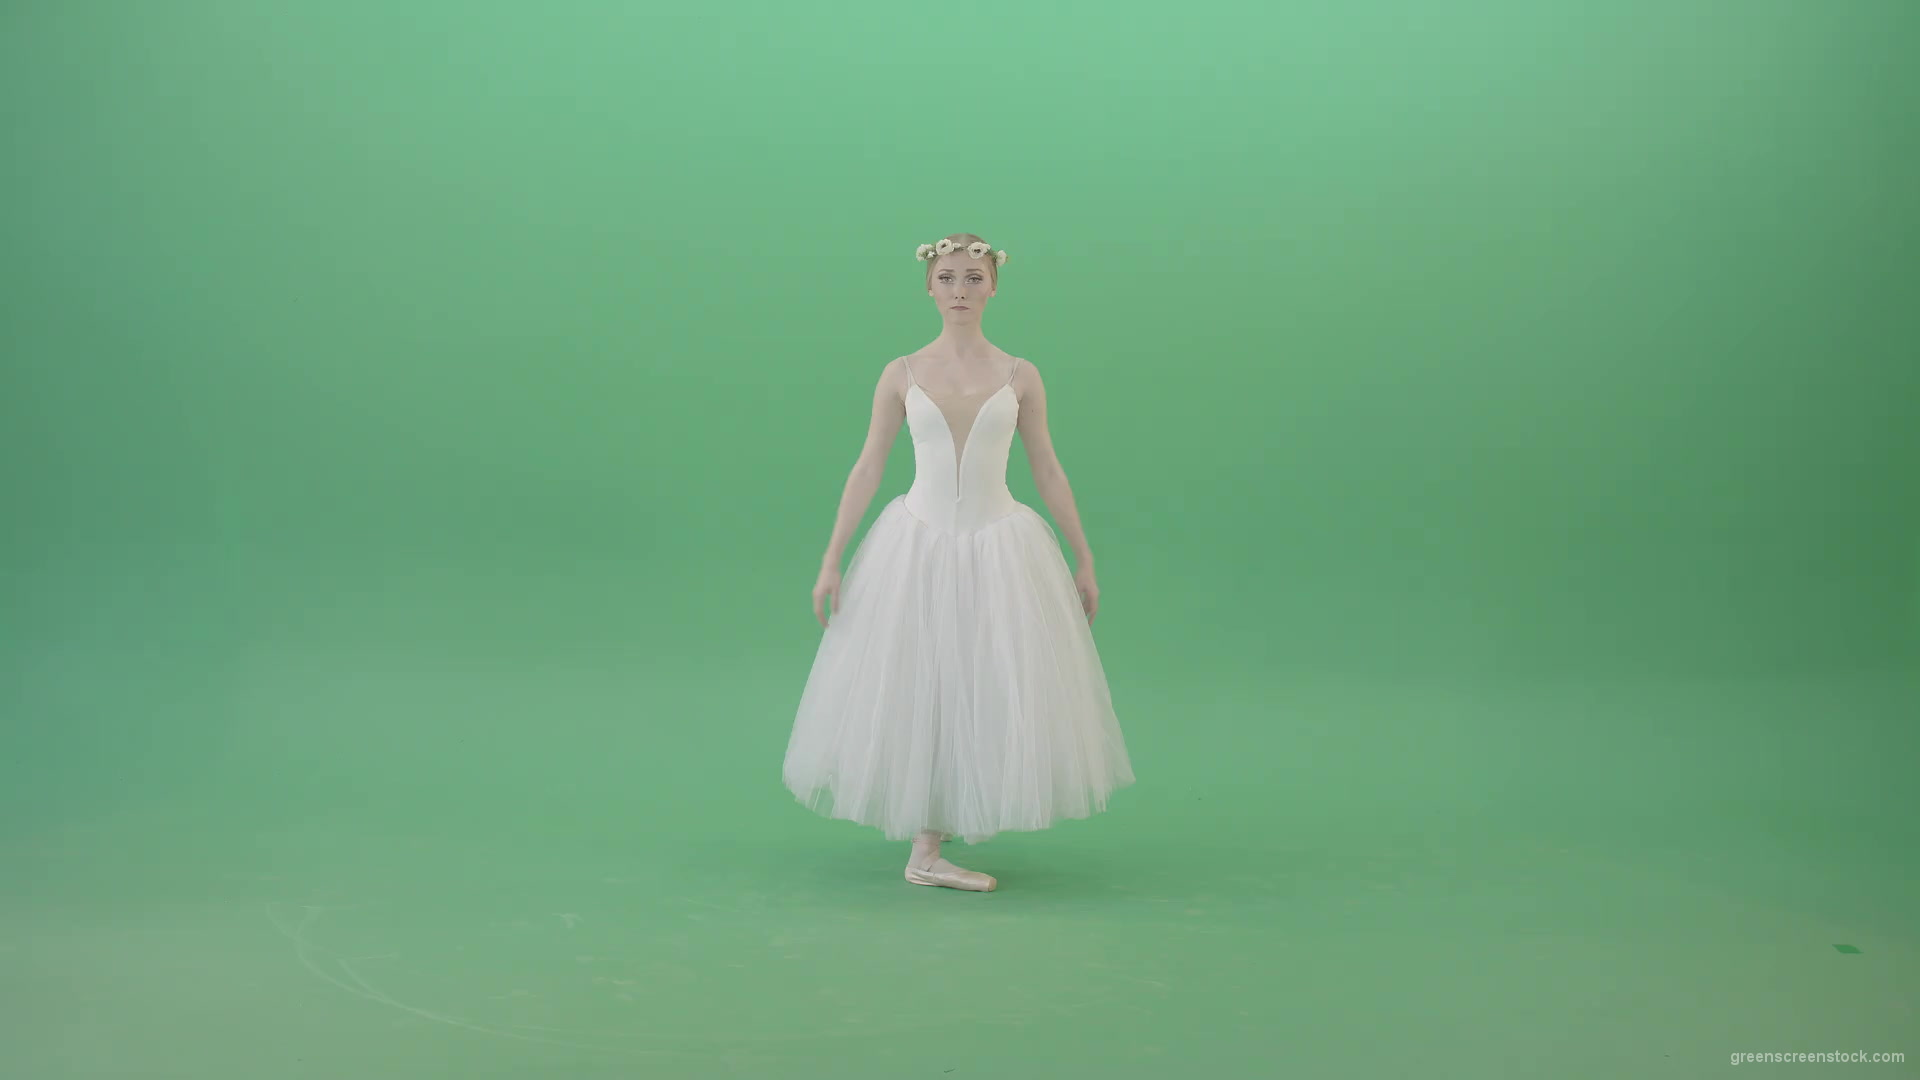 Ballet-Art-Princes-making-royal-regards-in-white-wedding-dress-isolated-on-green-screen-4K-Video-Footage-1920_001 Green Screen Stock